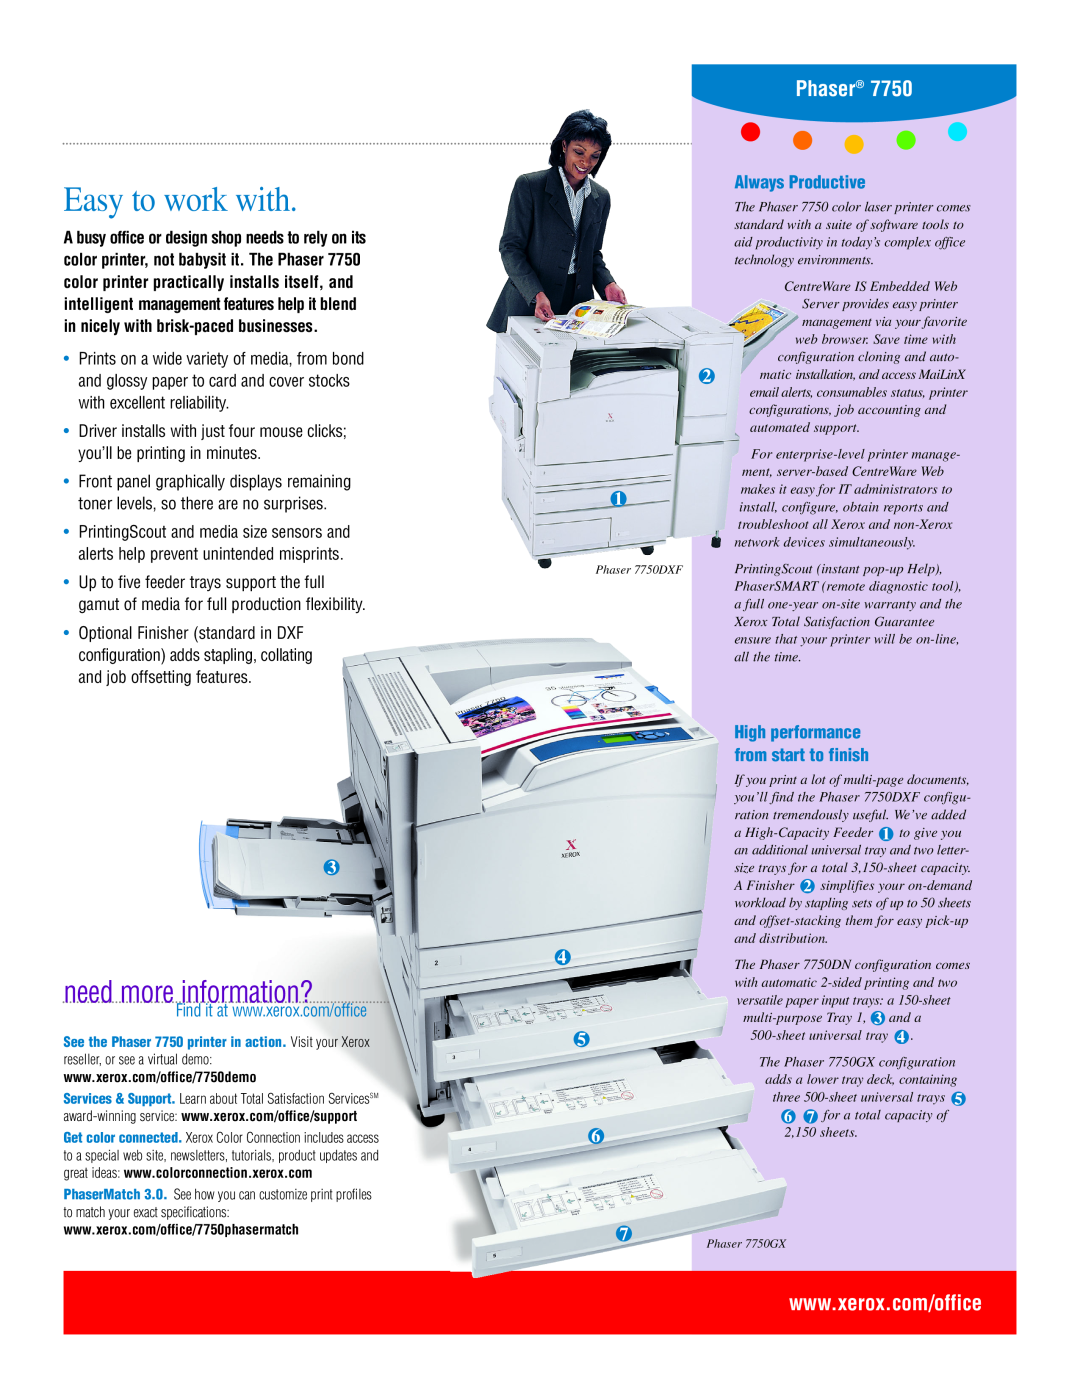 Xerox 7750 manual Easy to work with, need more information?, Phaser, Always Productive 